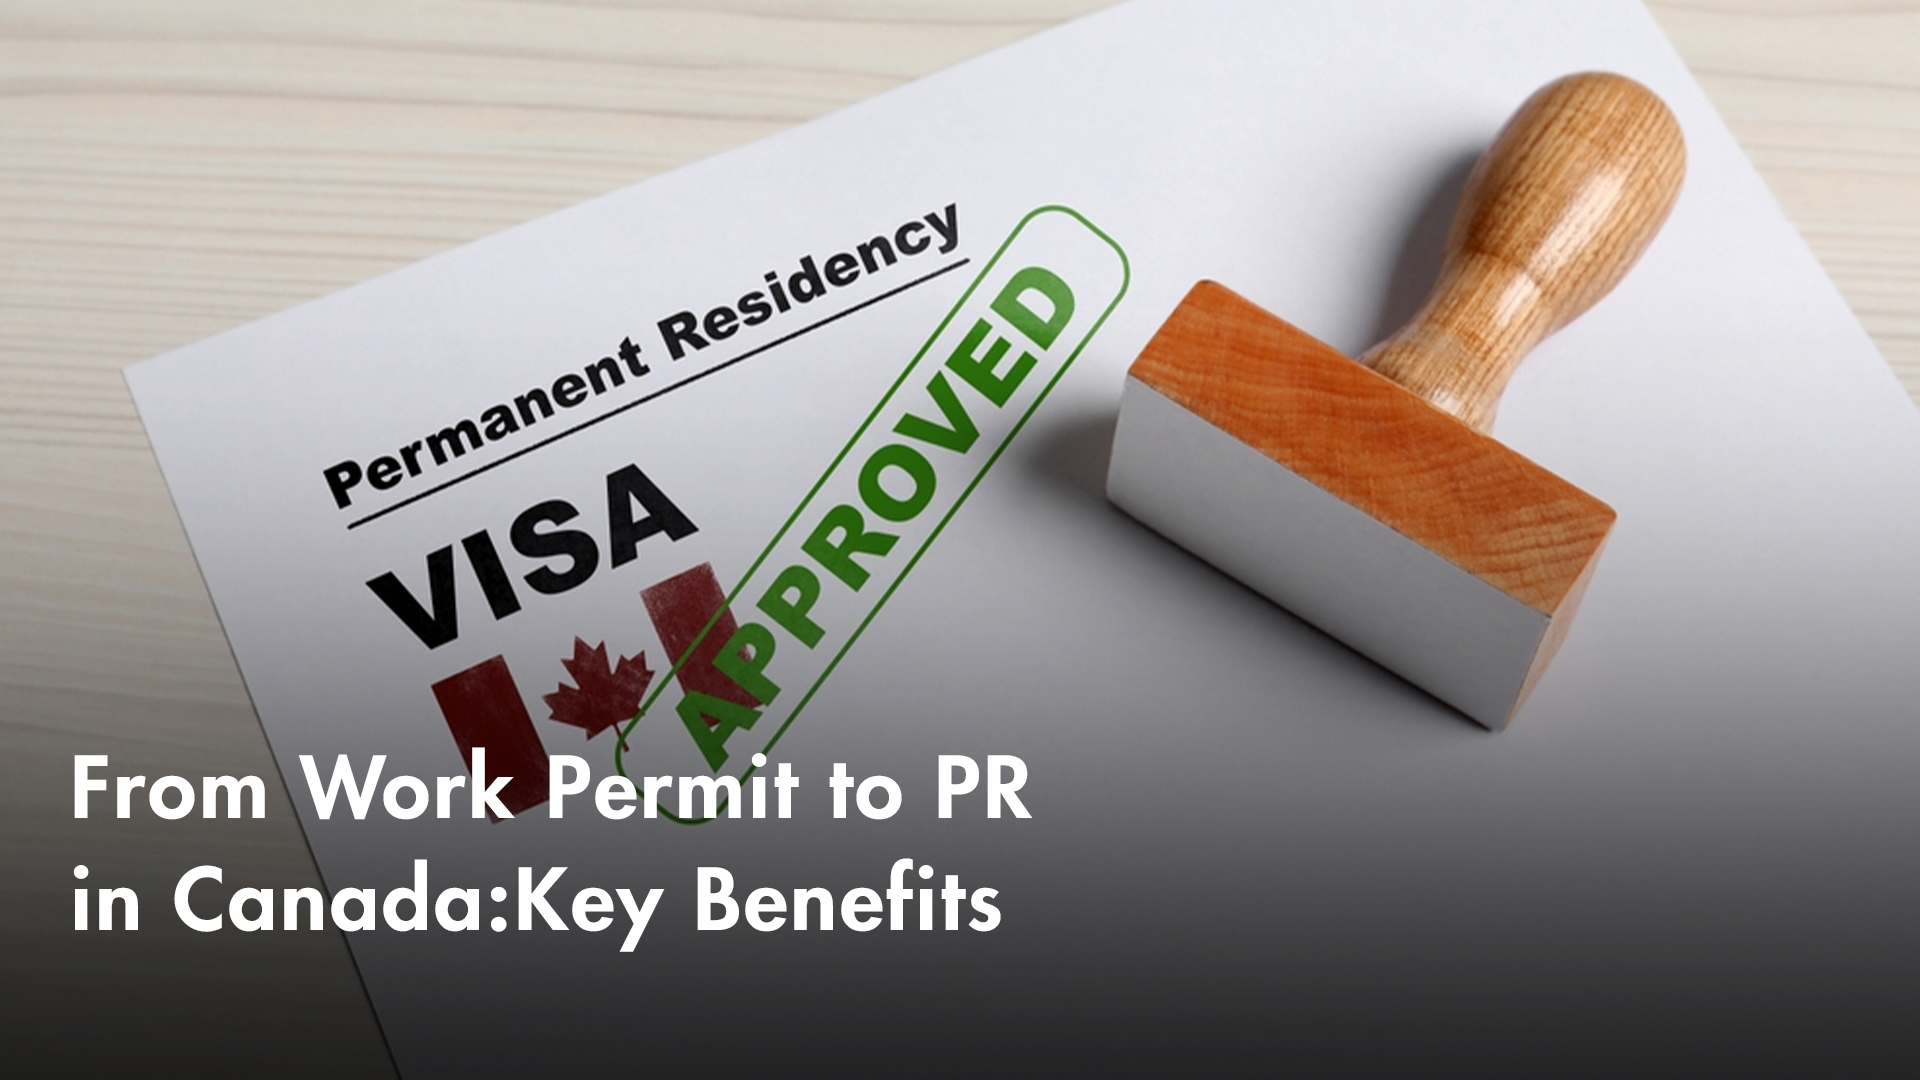 From Work Permit to PR in Canada: Key Benefits